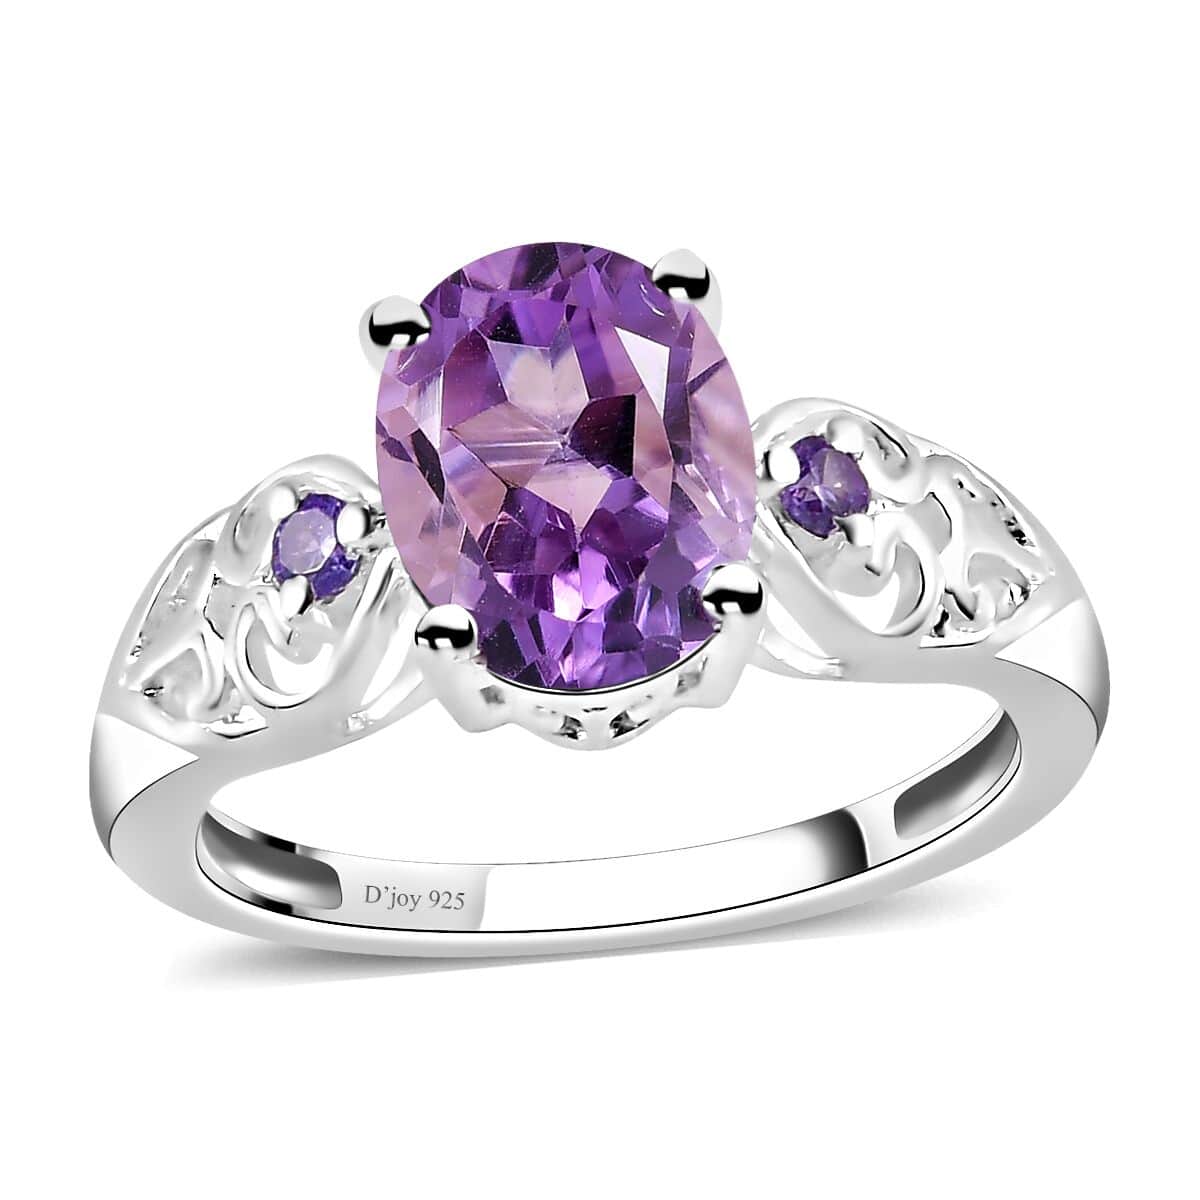 Buy Mother's Day Gift Rose De France Amethyst Ring, Simulated